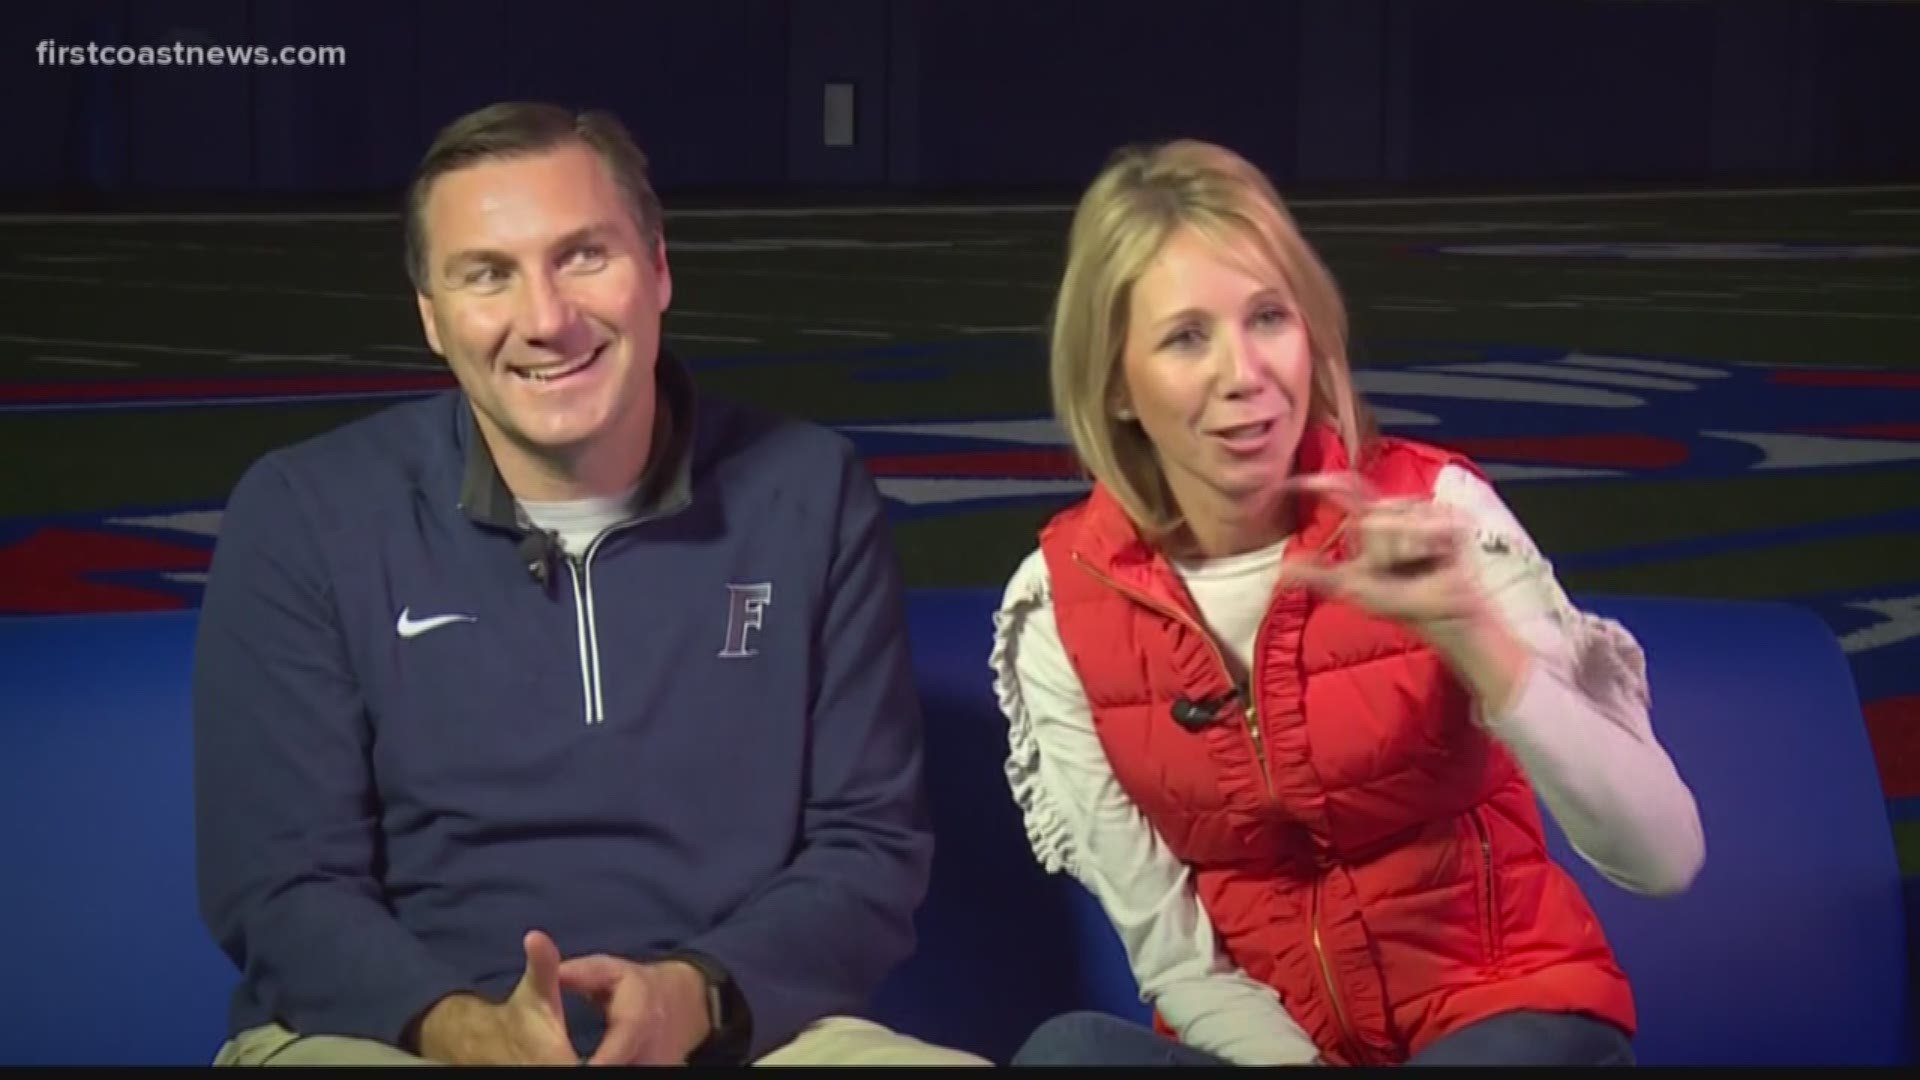 Mullen talks about accepting the head coaching job at the University of Florida, his wife accepting his request for a date, and more!